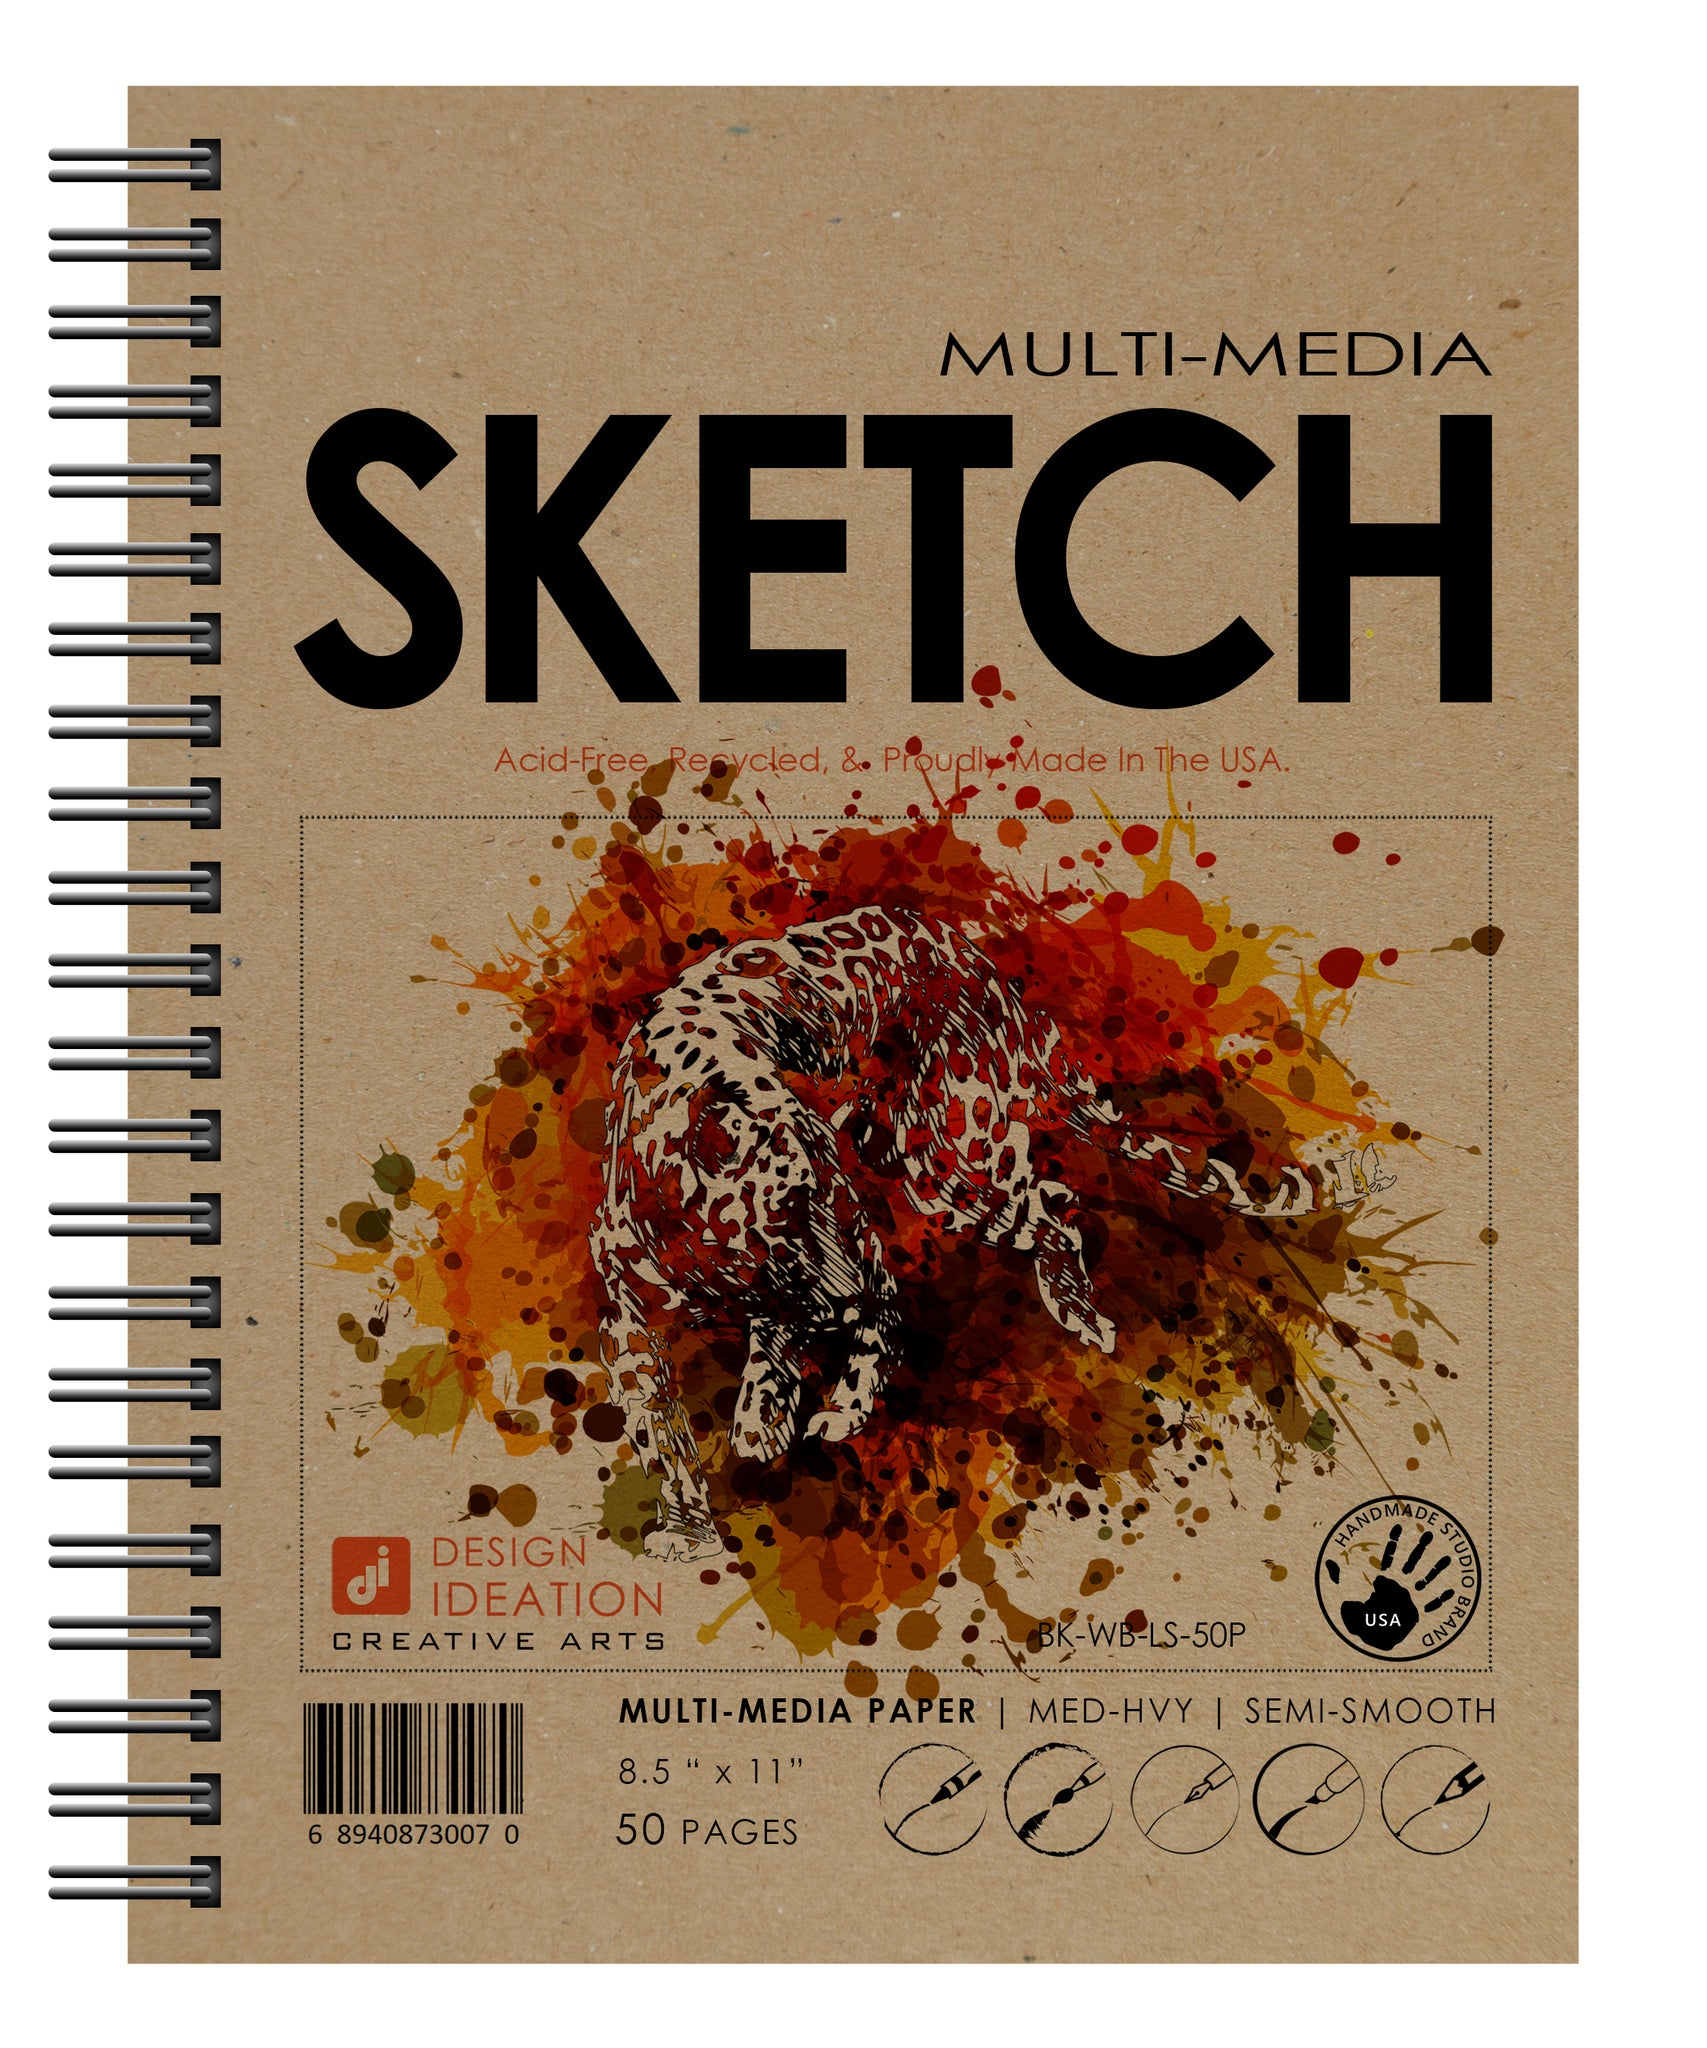 LAY FLAT sketchbook. Removable sheet, journal style WATERCOLOR book. M –  Design Ideation Studio